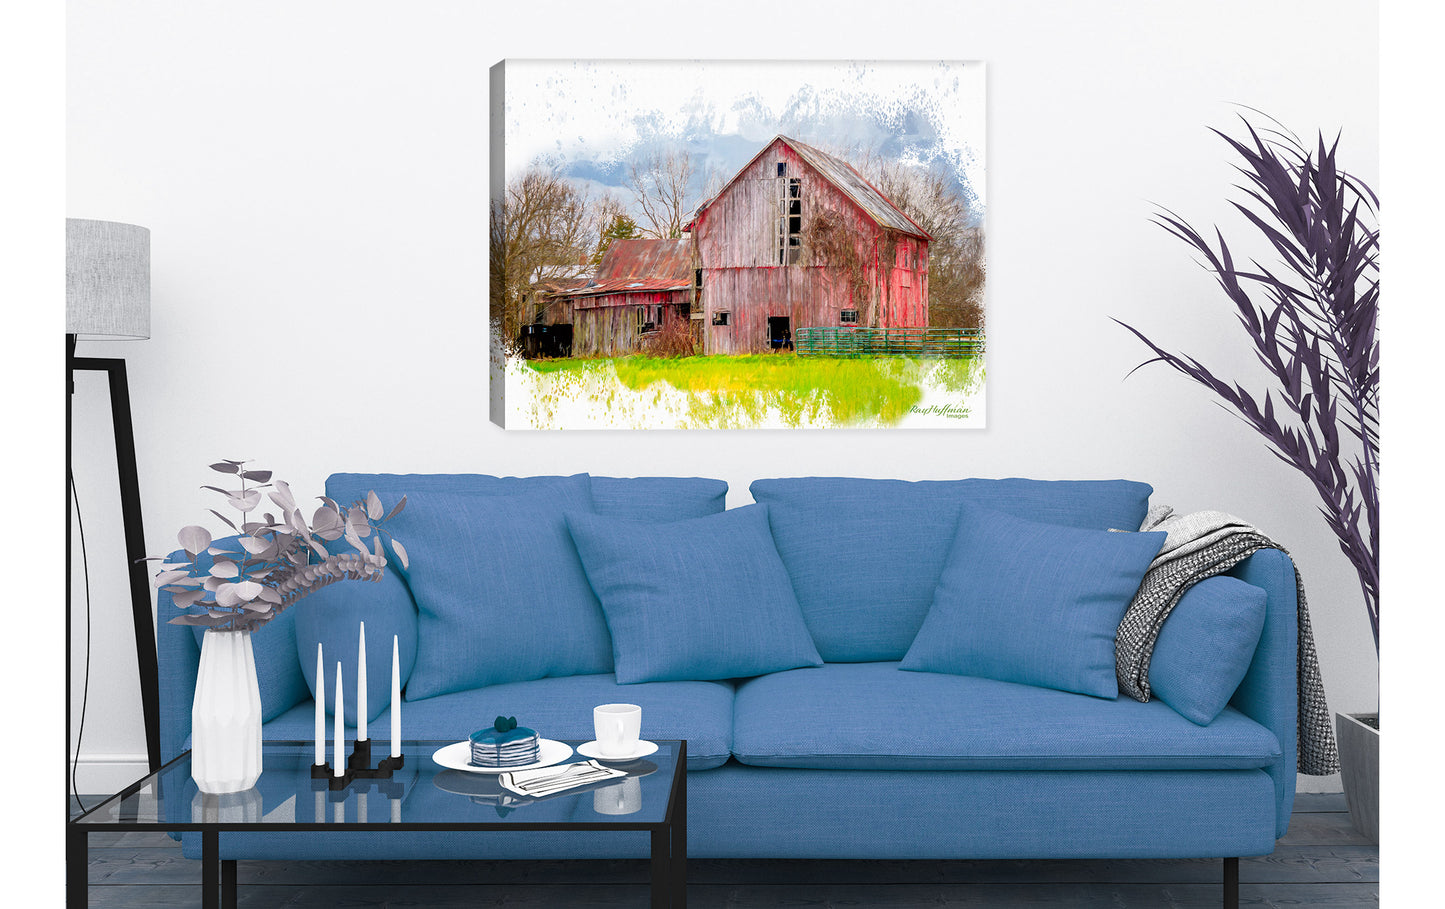 Countryside Barn - Watercolor on Canvas Painting